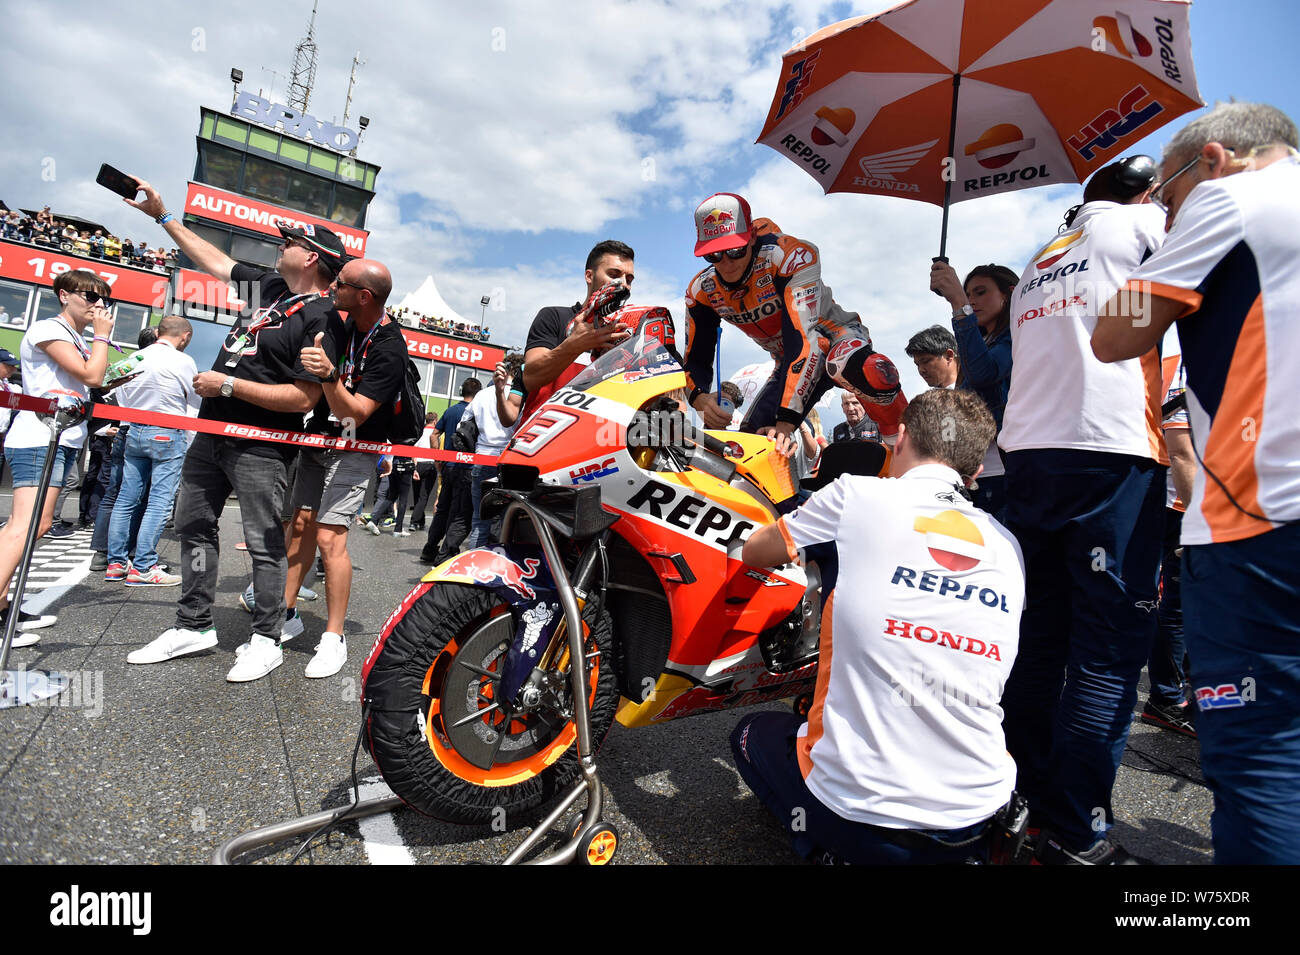 Brno, Czech Republic. 04th Aug, 2019. Road racer Marc Marquez (Spain) is  seen prior to the start of the MotoGP category race during the Czech  Republic motorcycle Grand Prix 2019 in Brno